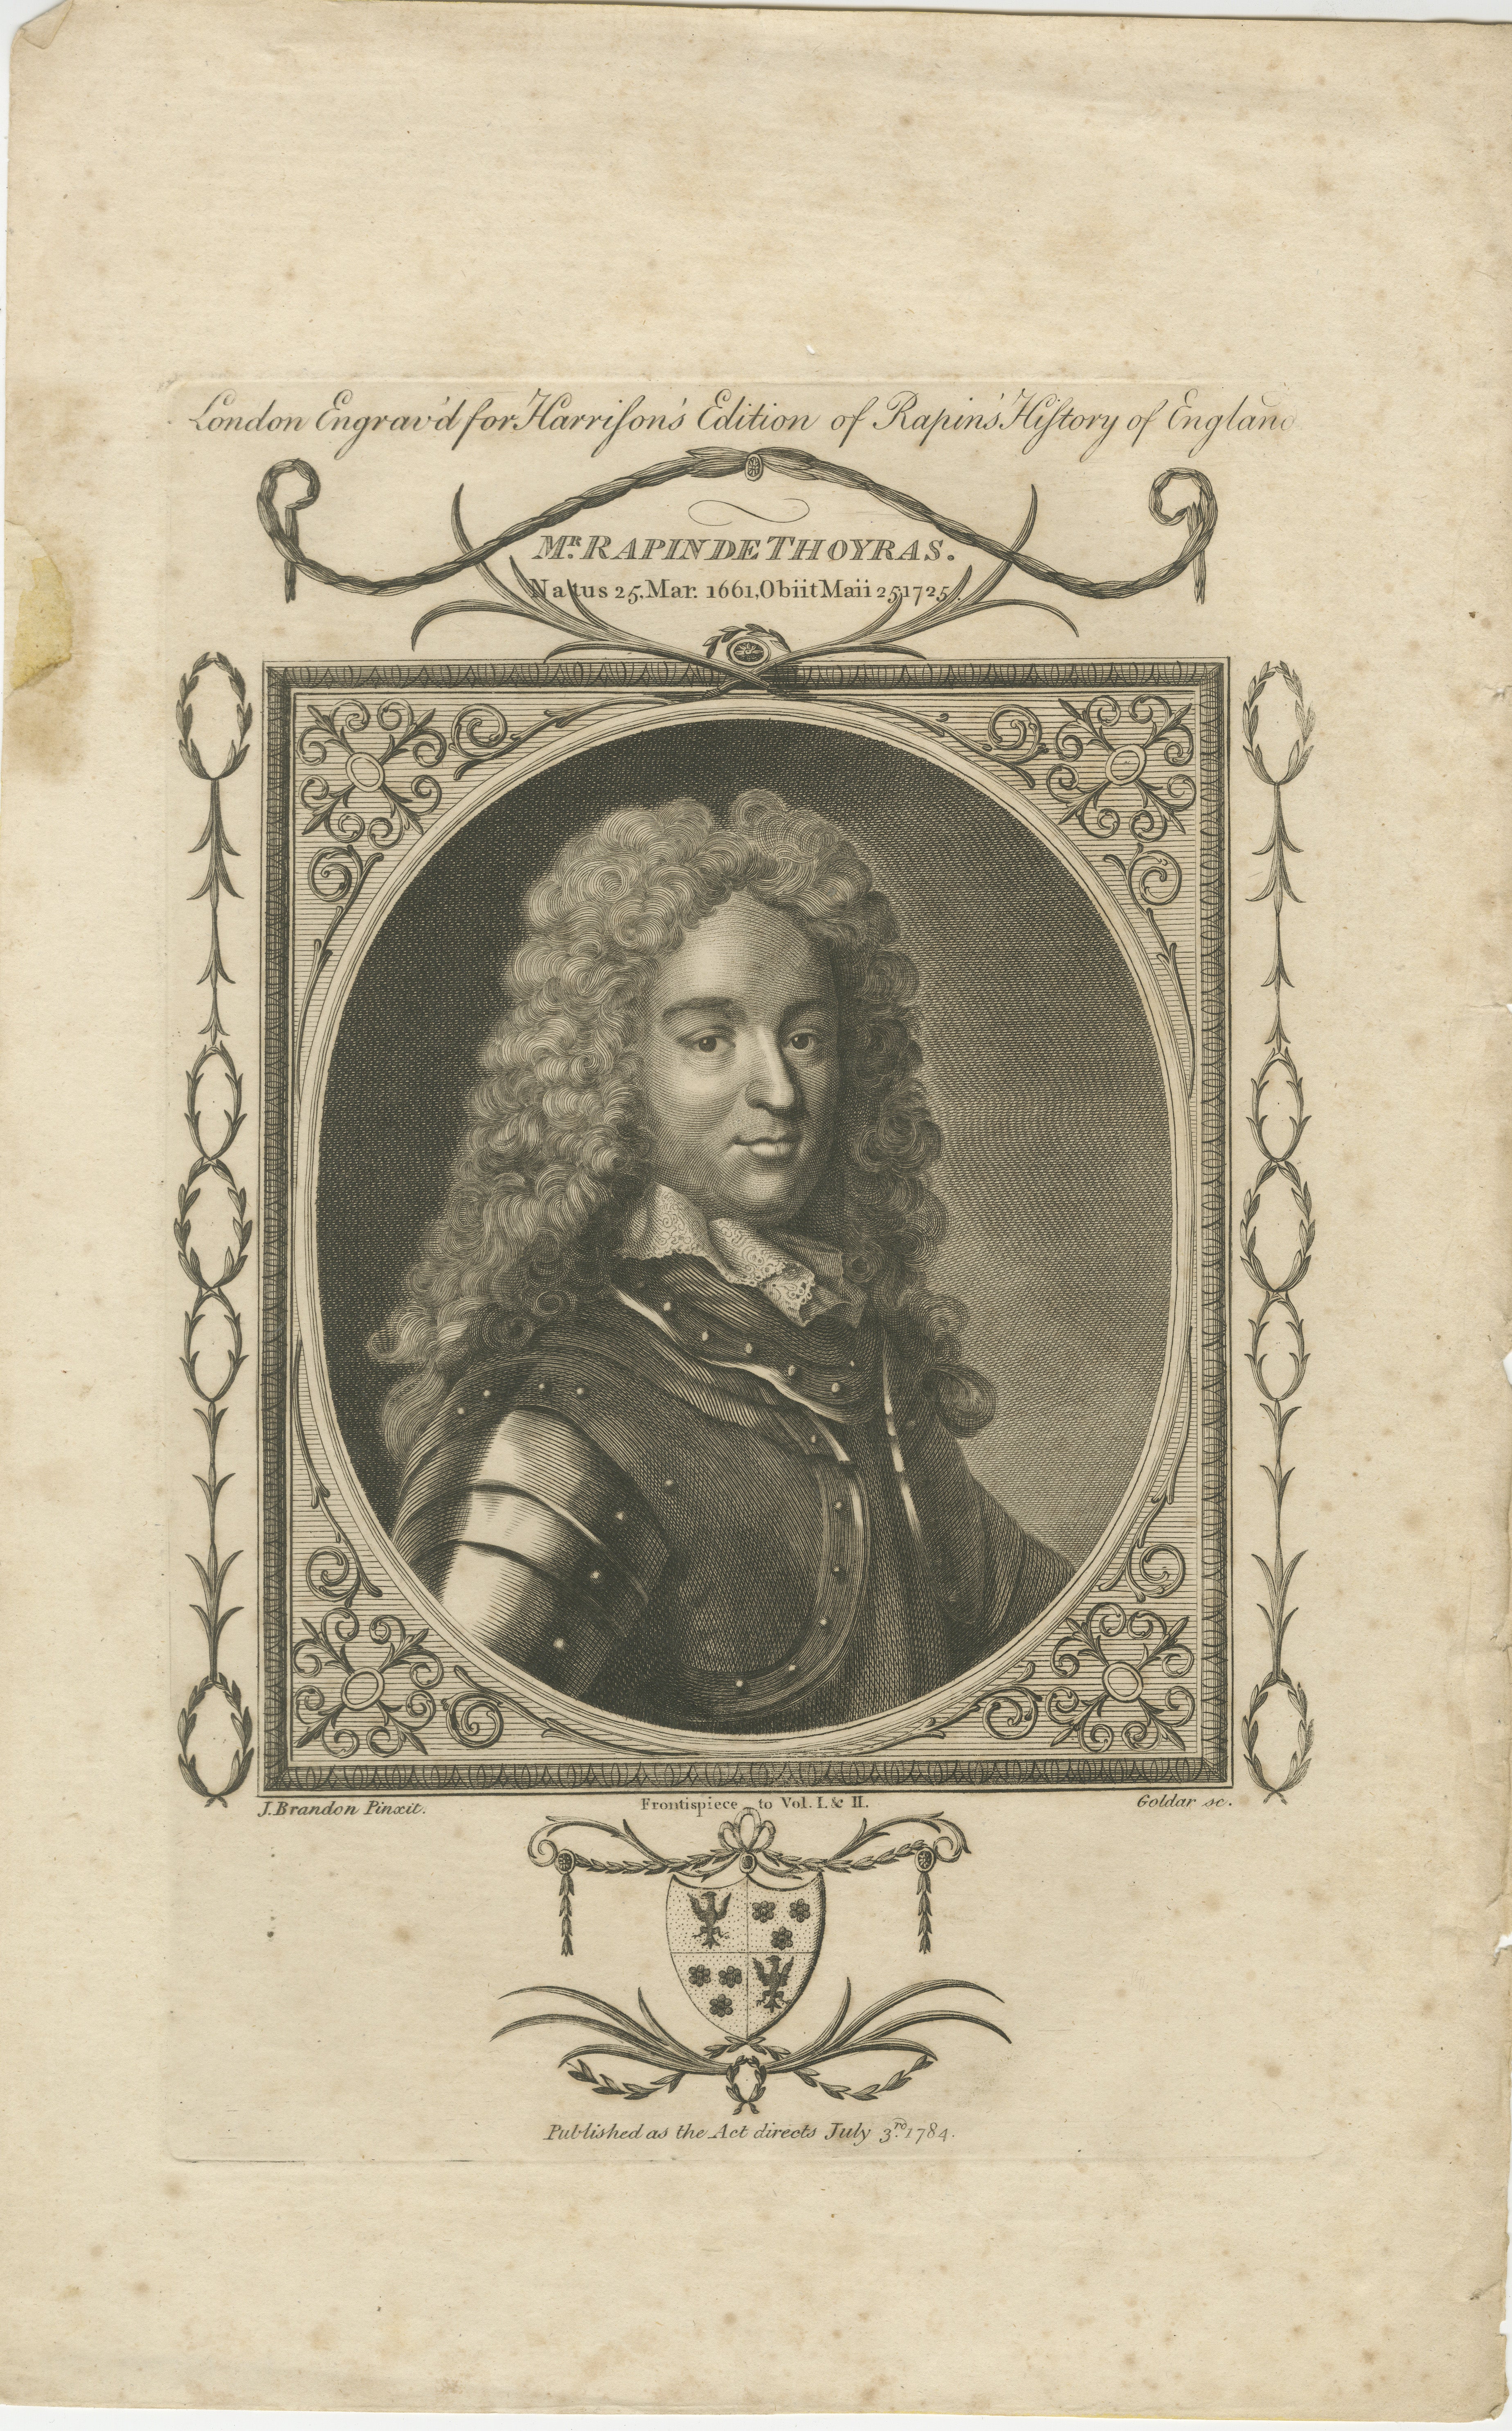 This image is an engraved portrait of Mr. Rapin de Thoyras, created for Harrington's edition of 